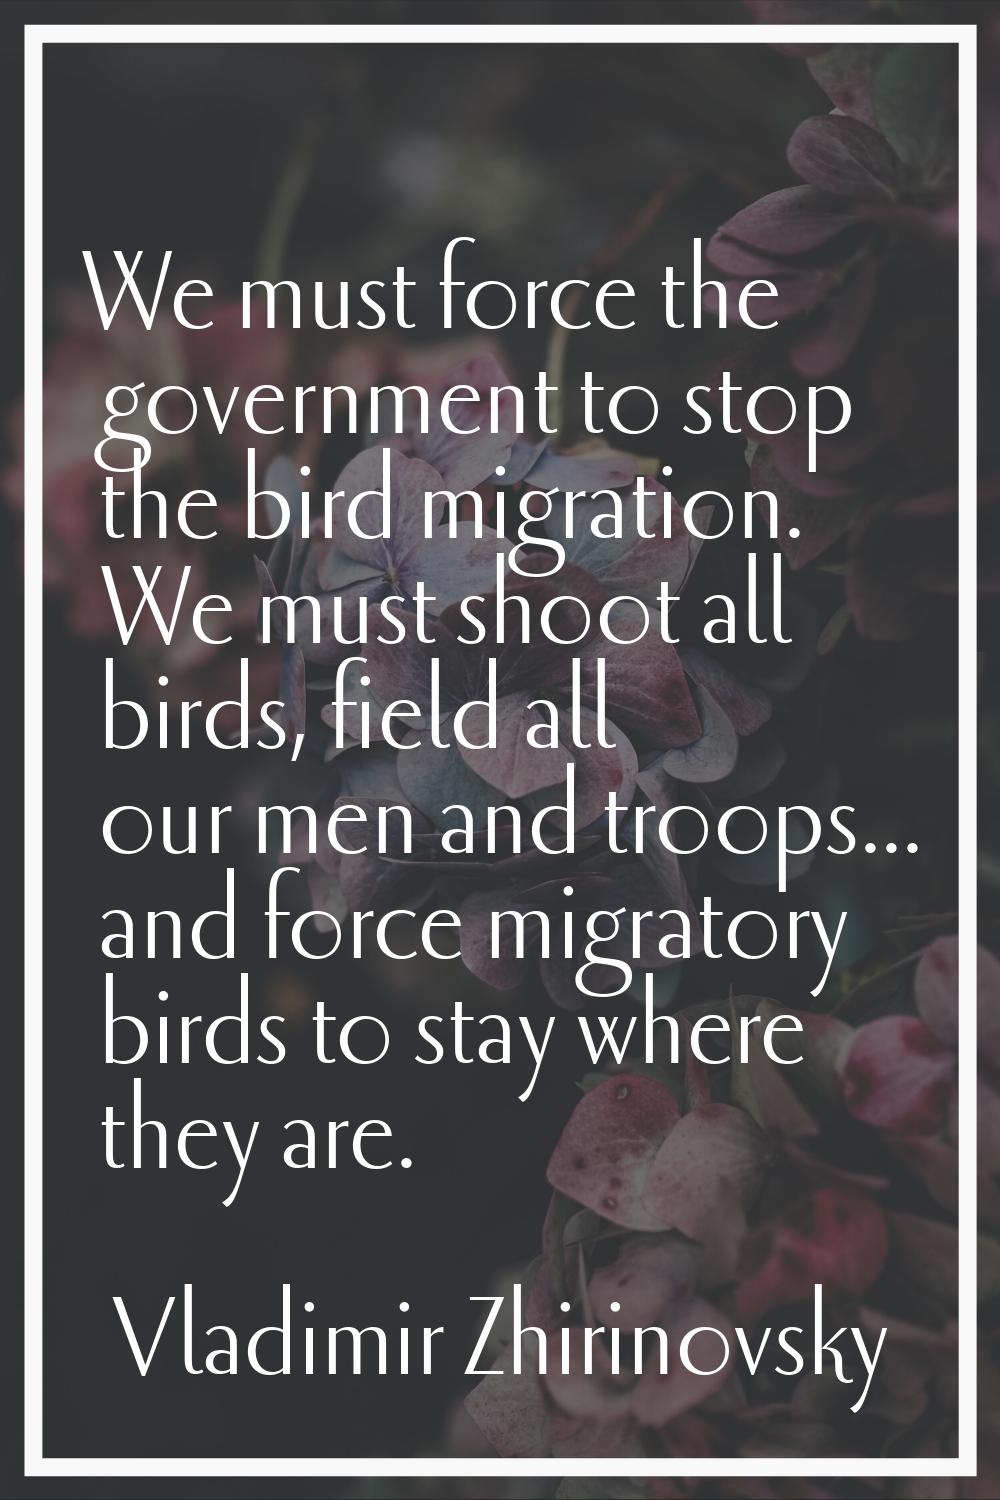 We must force the government to stop the bird migration. We must shoot all birds, field all our men